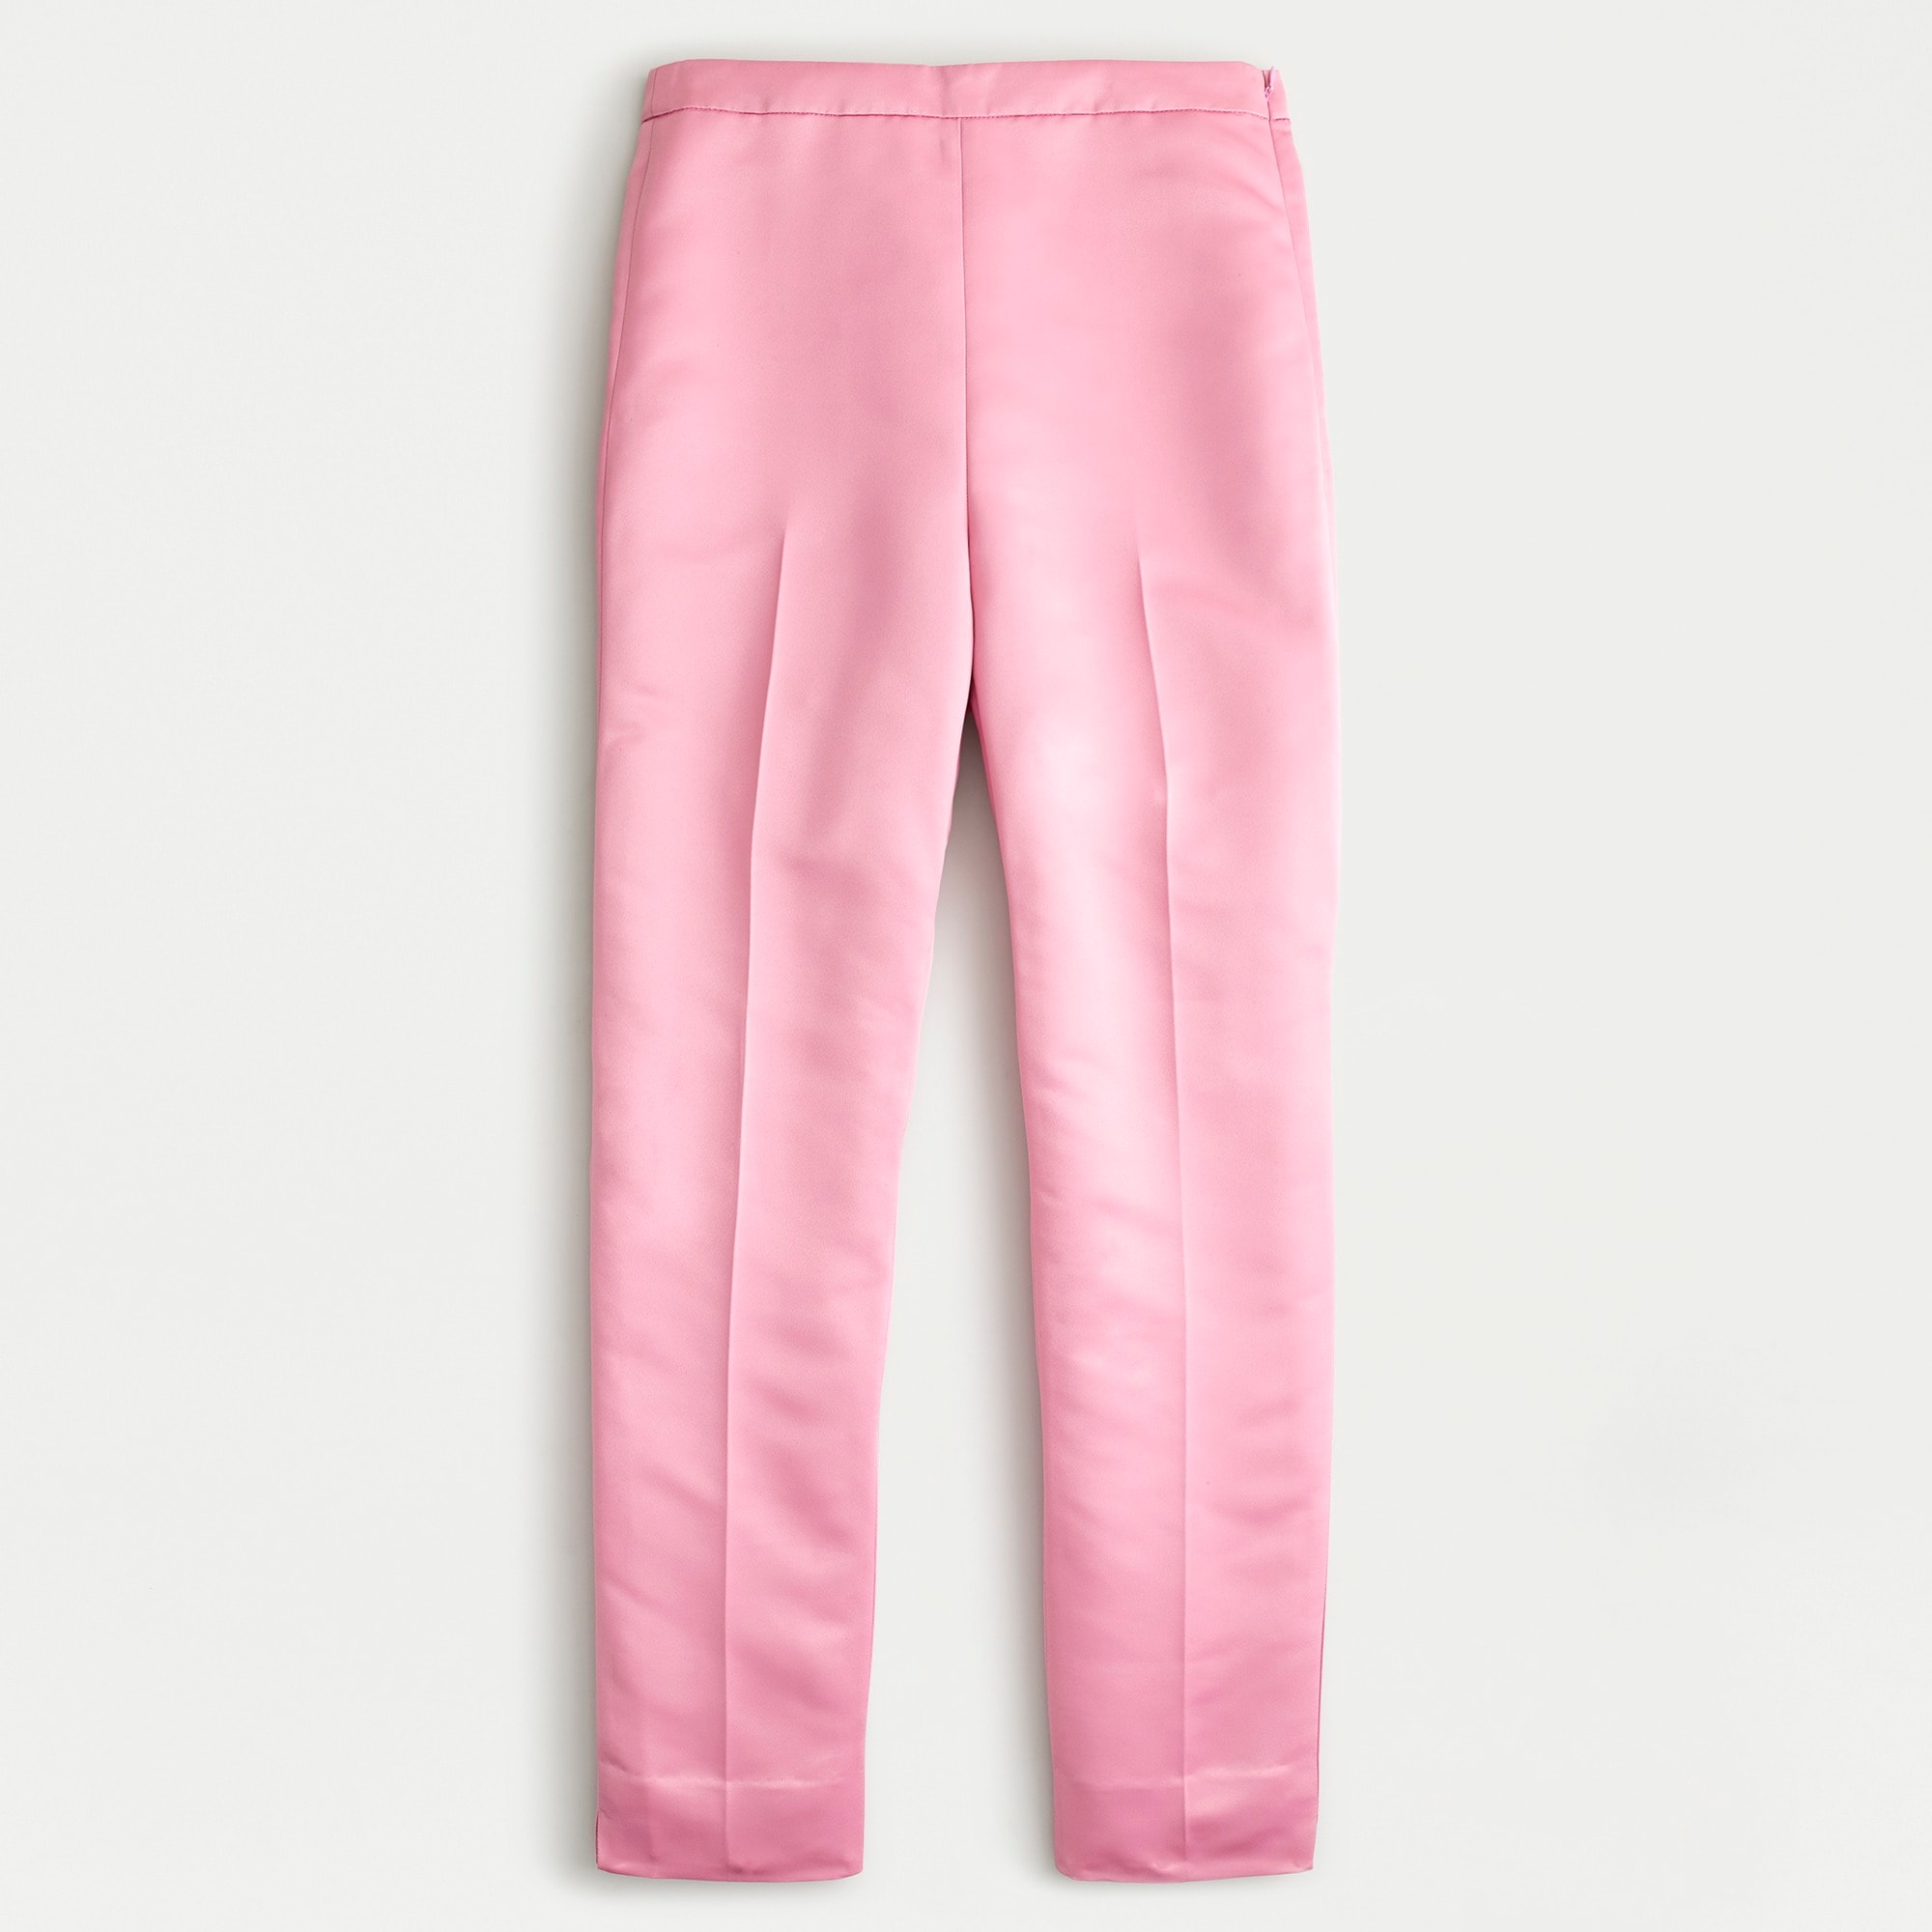 J.Crew: High-rise Cigarette Pant In Satin For Women